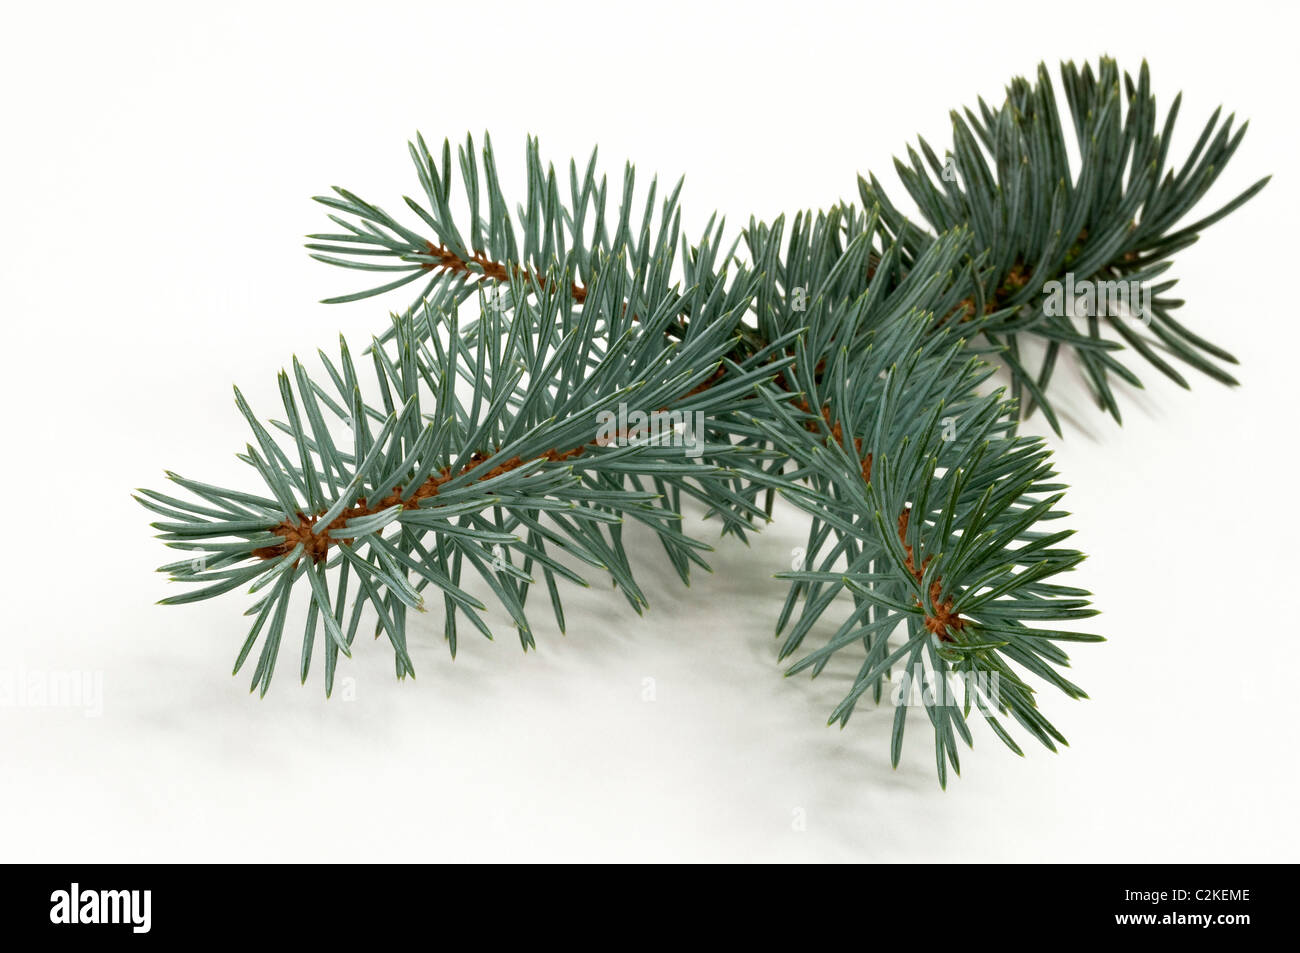 Blue Spruce (Picea pungens glauca), twig. Studio picture against a white background. Stock Photo